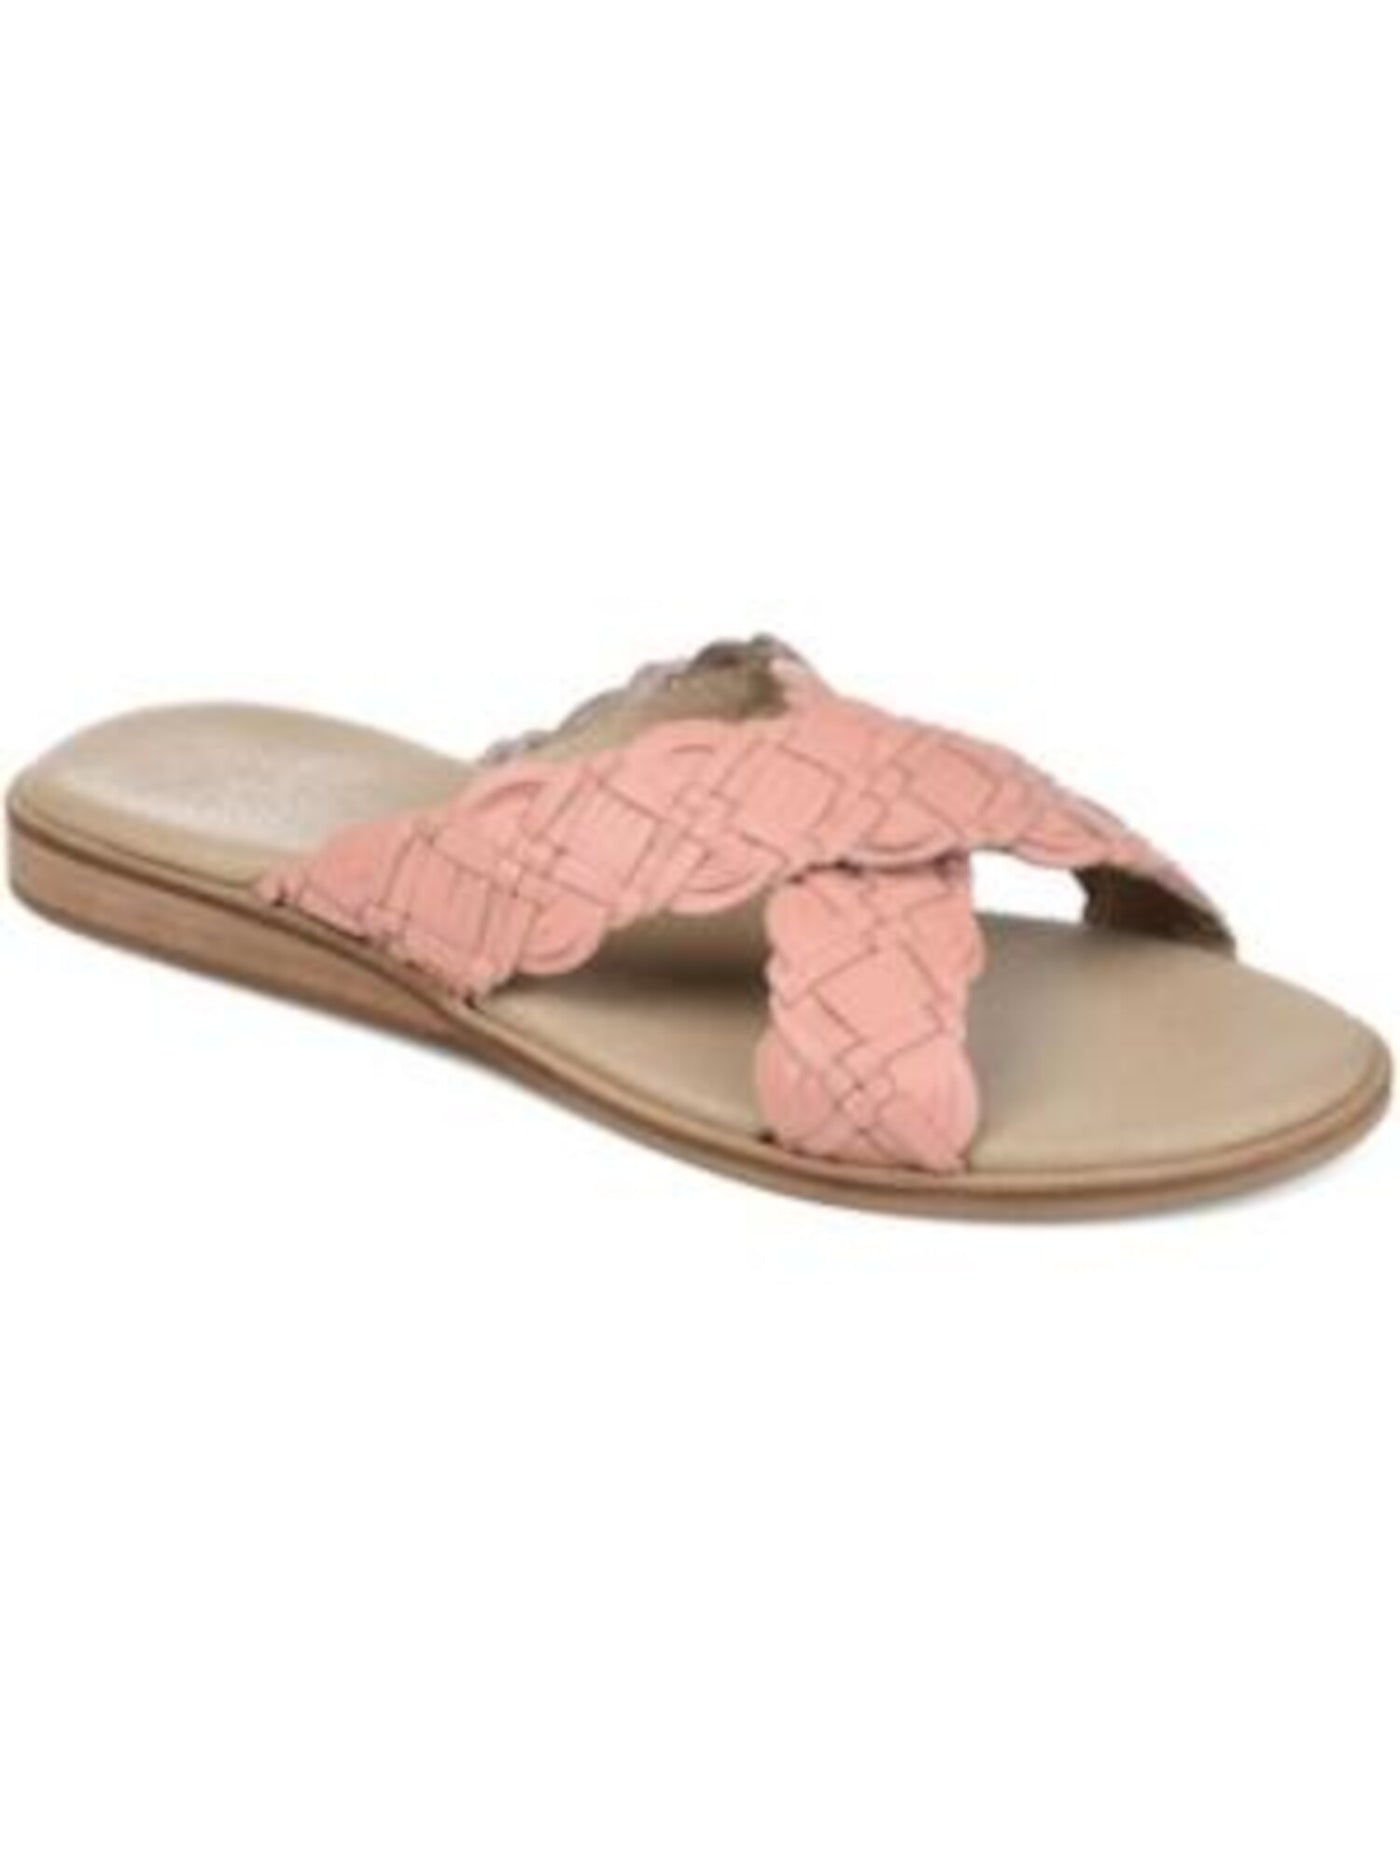 JOURNEE COLLECTION Womens Pink Braided Crisscross Straps Cushioned Bryson Round Toe Slip On Sandals Shoes 7.5